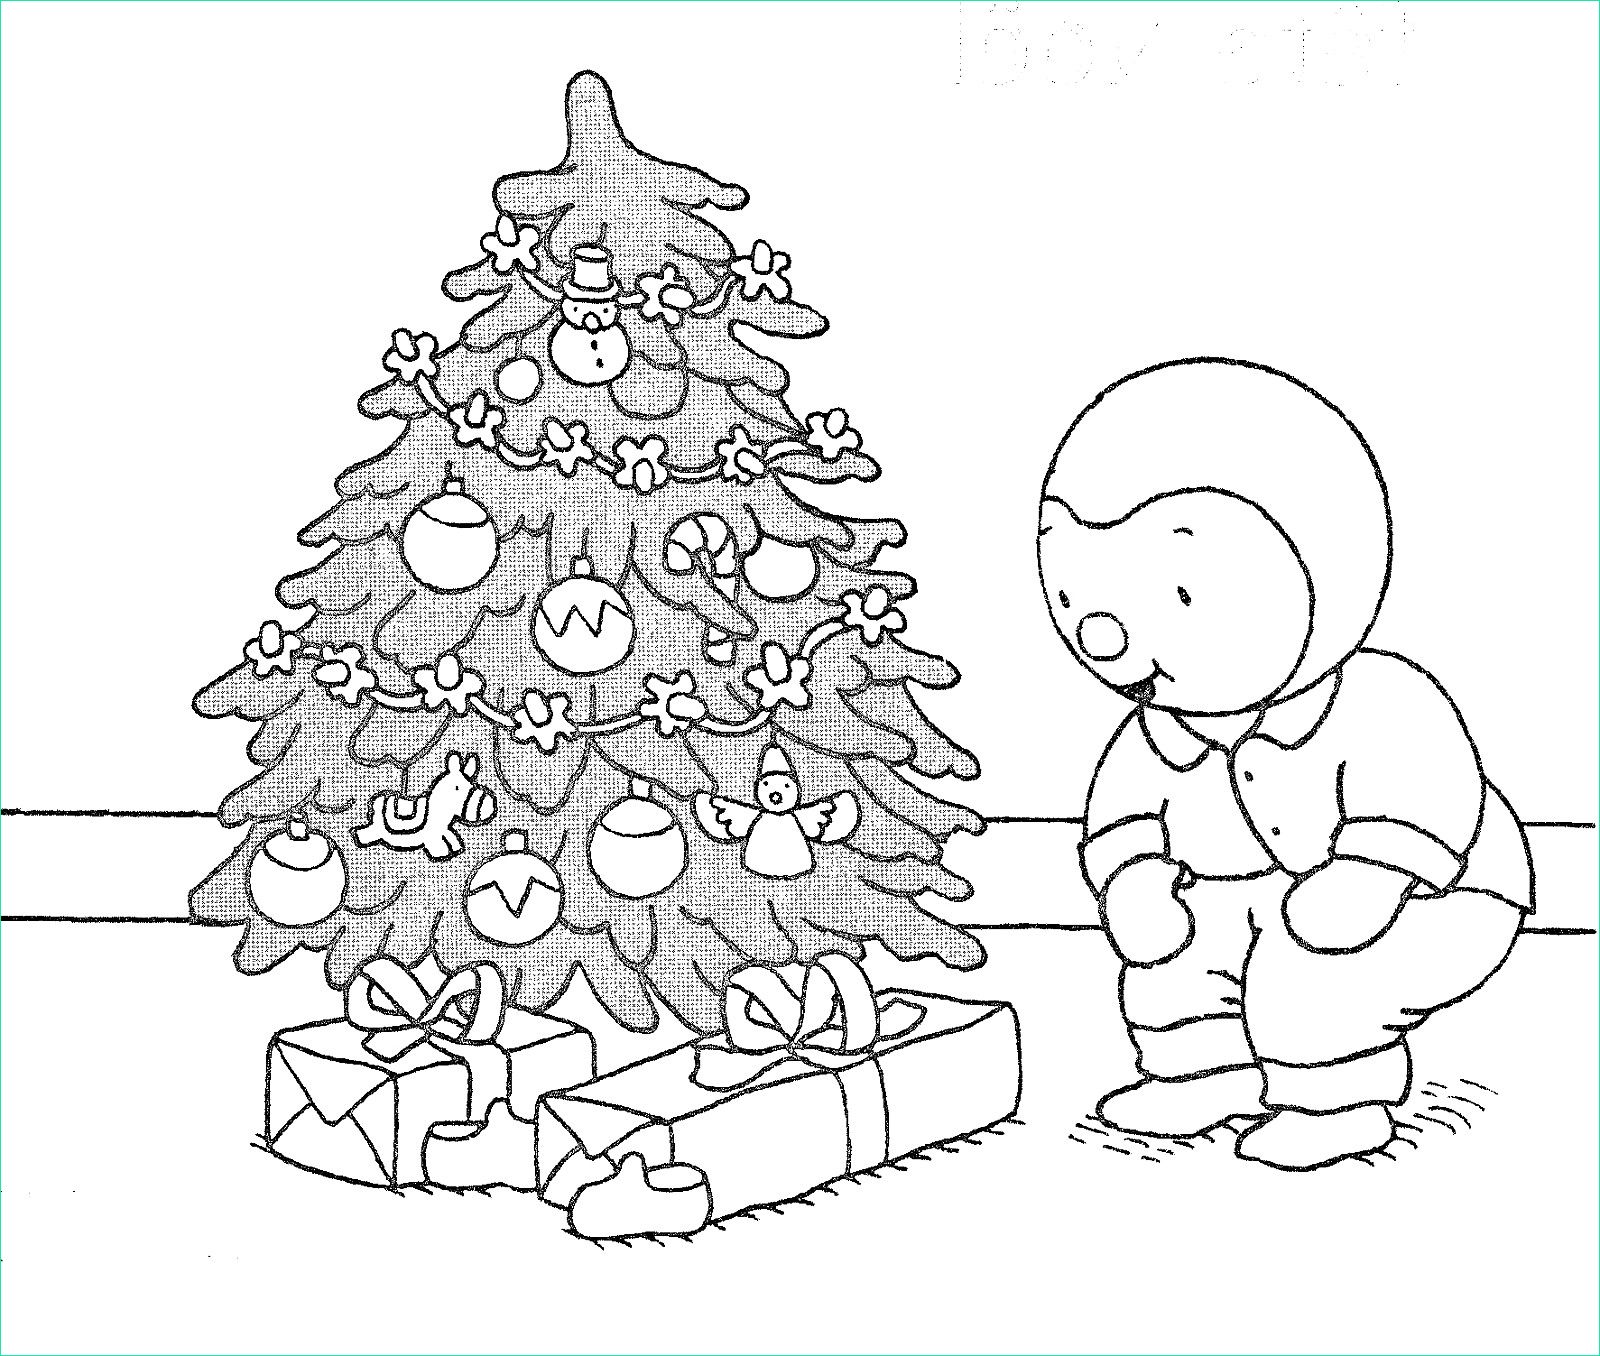 Coloriage Pere Noel Sapin Cool Image Coloriage De Sapin De Noël à Imprimer Coloriage De Sapin